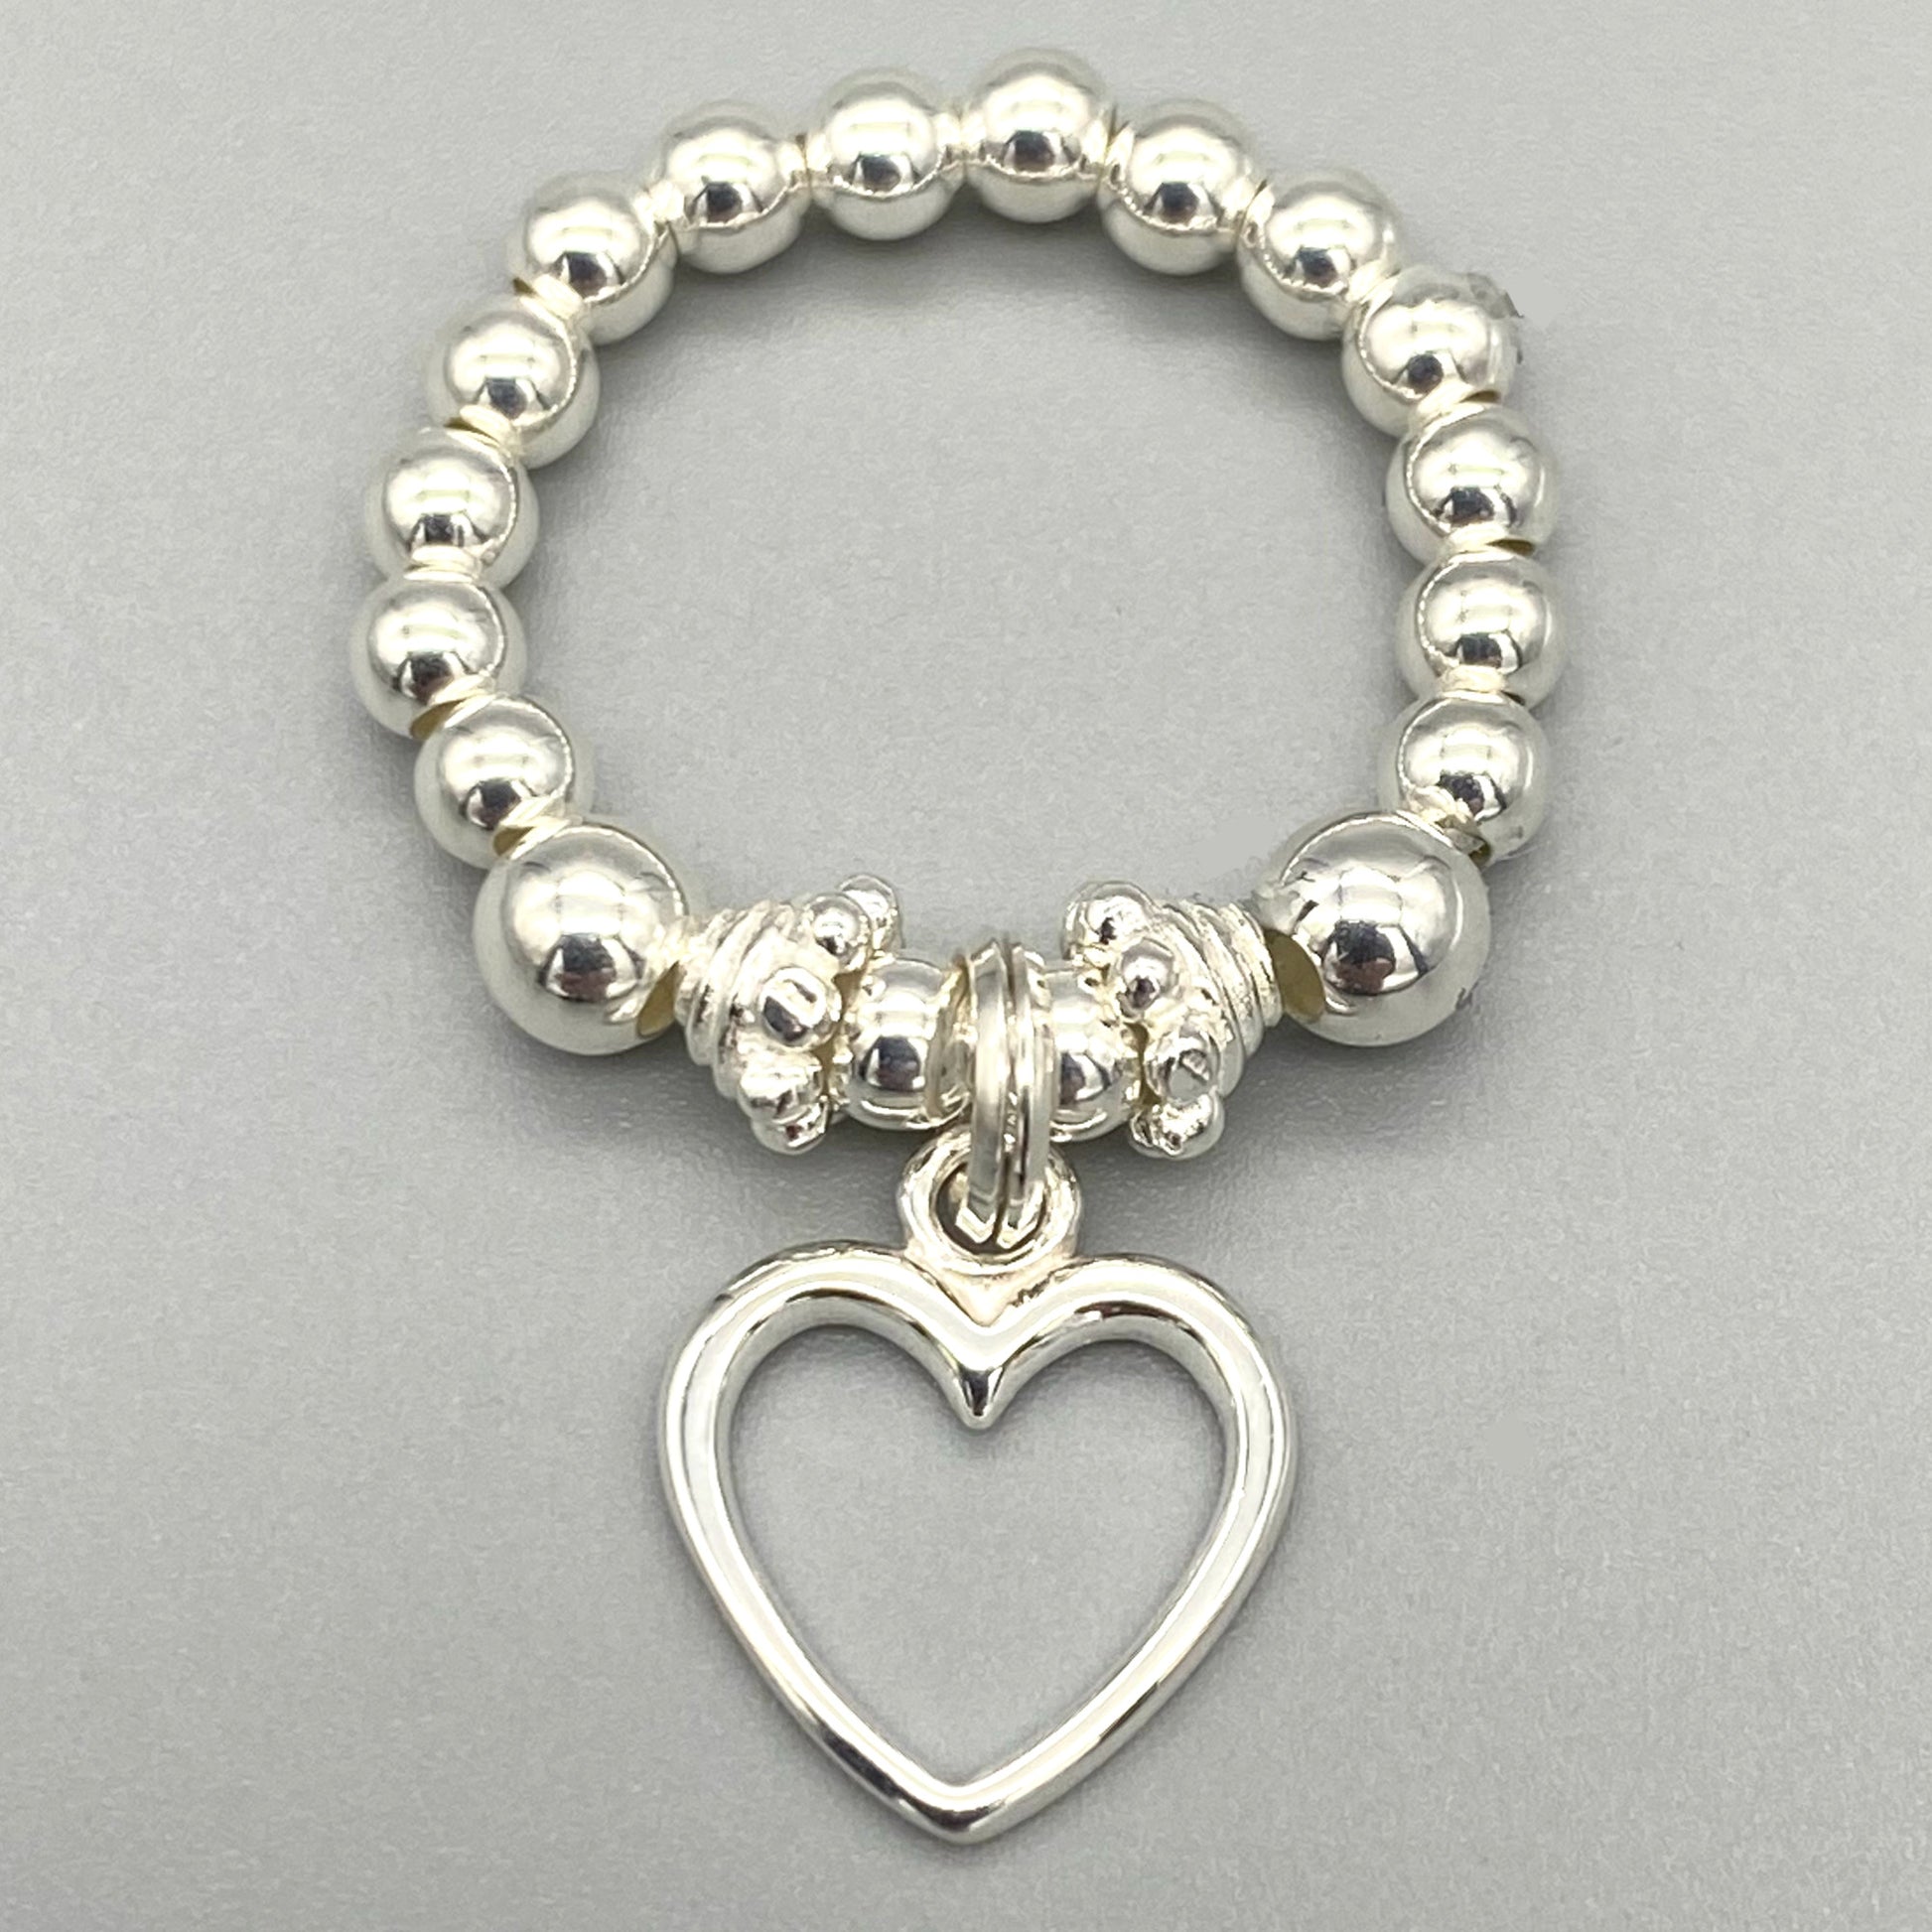 Heart charm women's hand-made sterling silver bead stacking ring by My Silver Wish